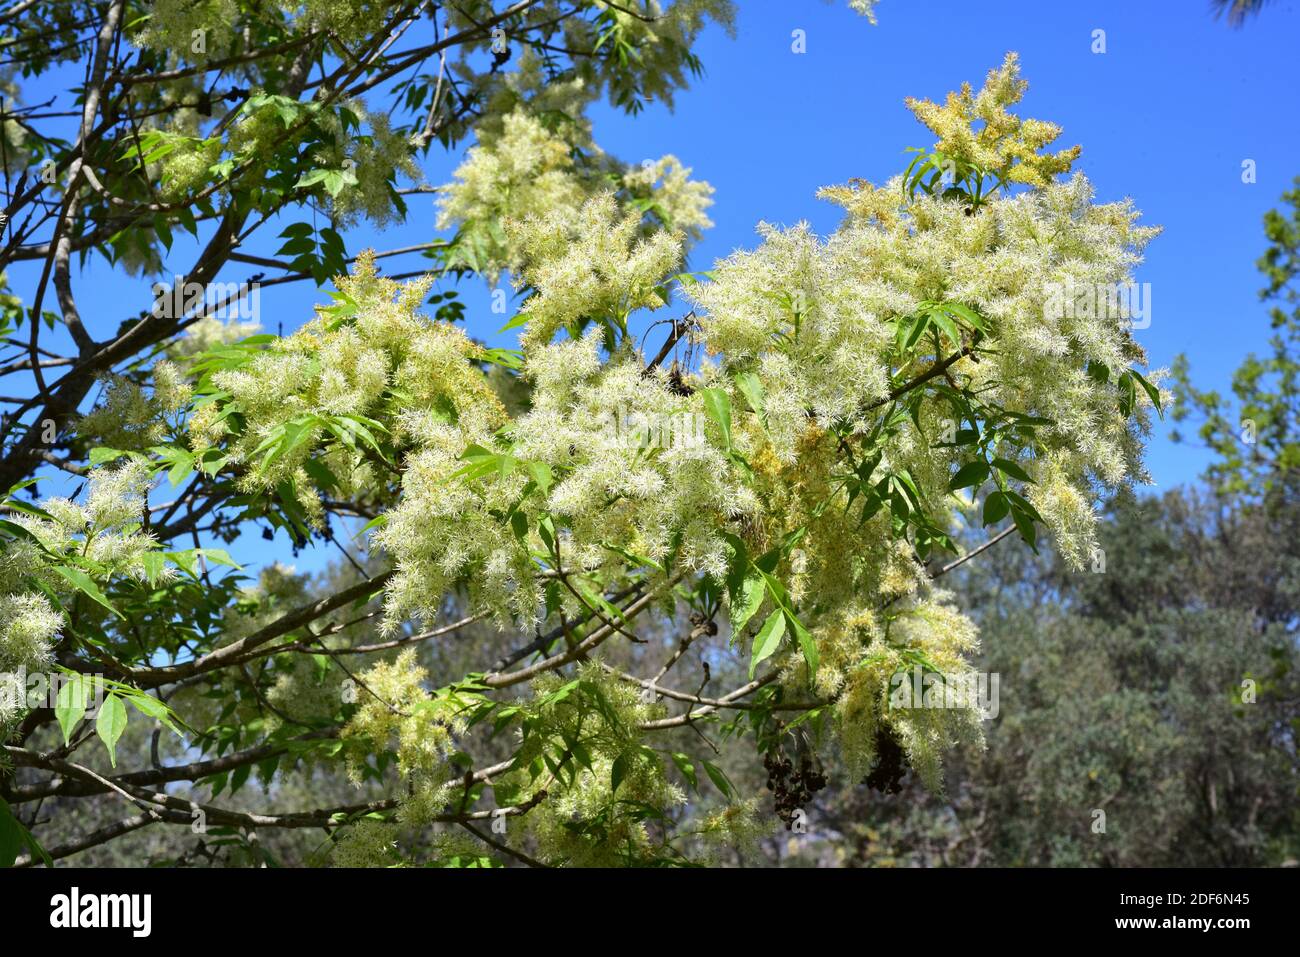 Manna ash (Fraxinus ornus) is a deciduous tree native to south Europe and southwest Asia.Inflorescences and leaves detail. Stock Photo